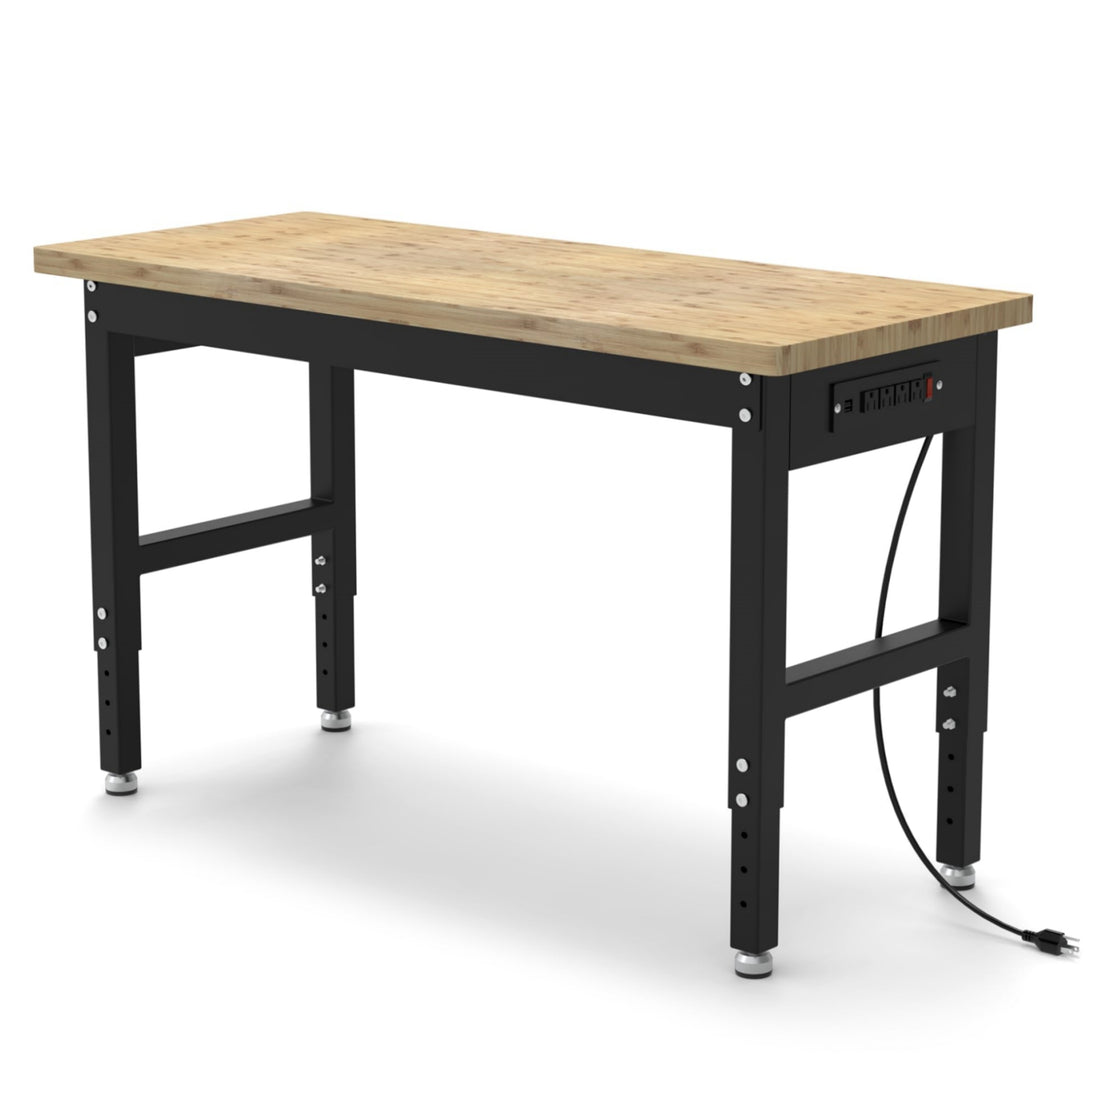 Height Adjustable Workbench, 48X24 Inch,2200 Lbs Weight Capacity with Power Socket,Cable for Garages, Workshops, Homes & Offices